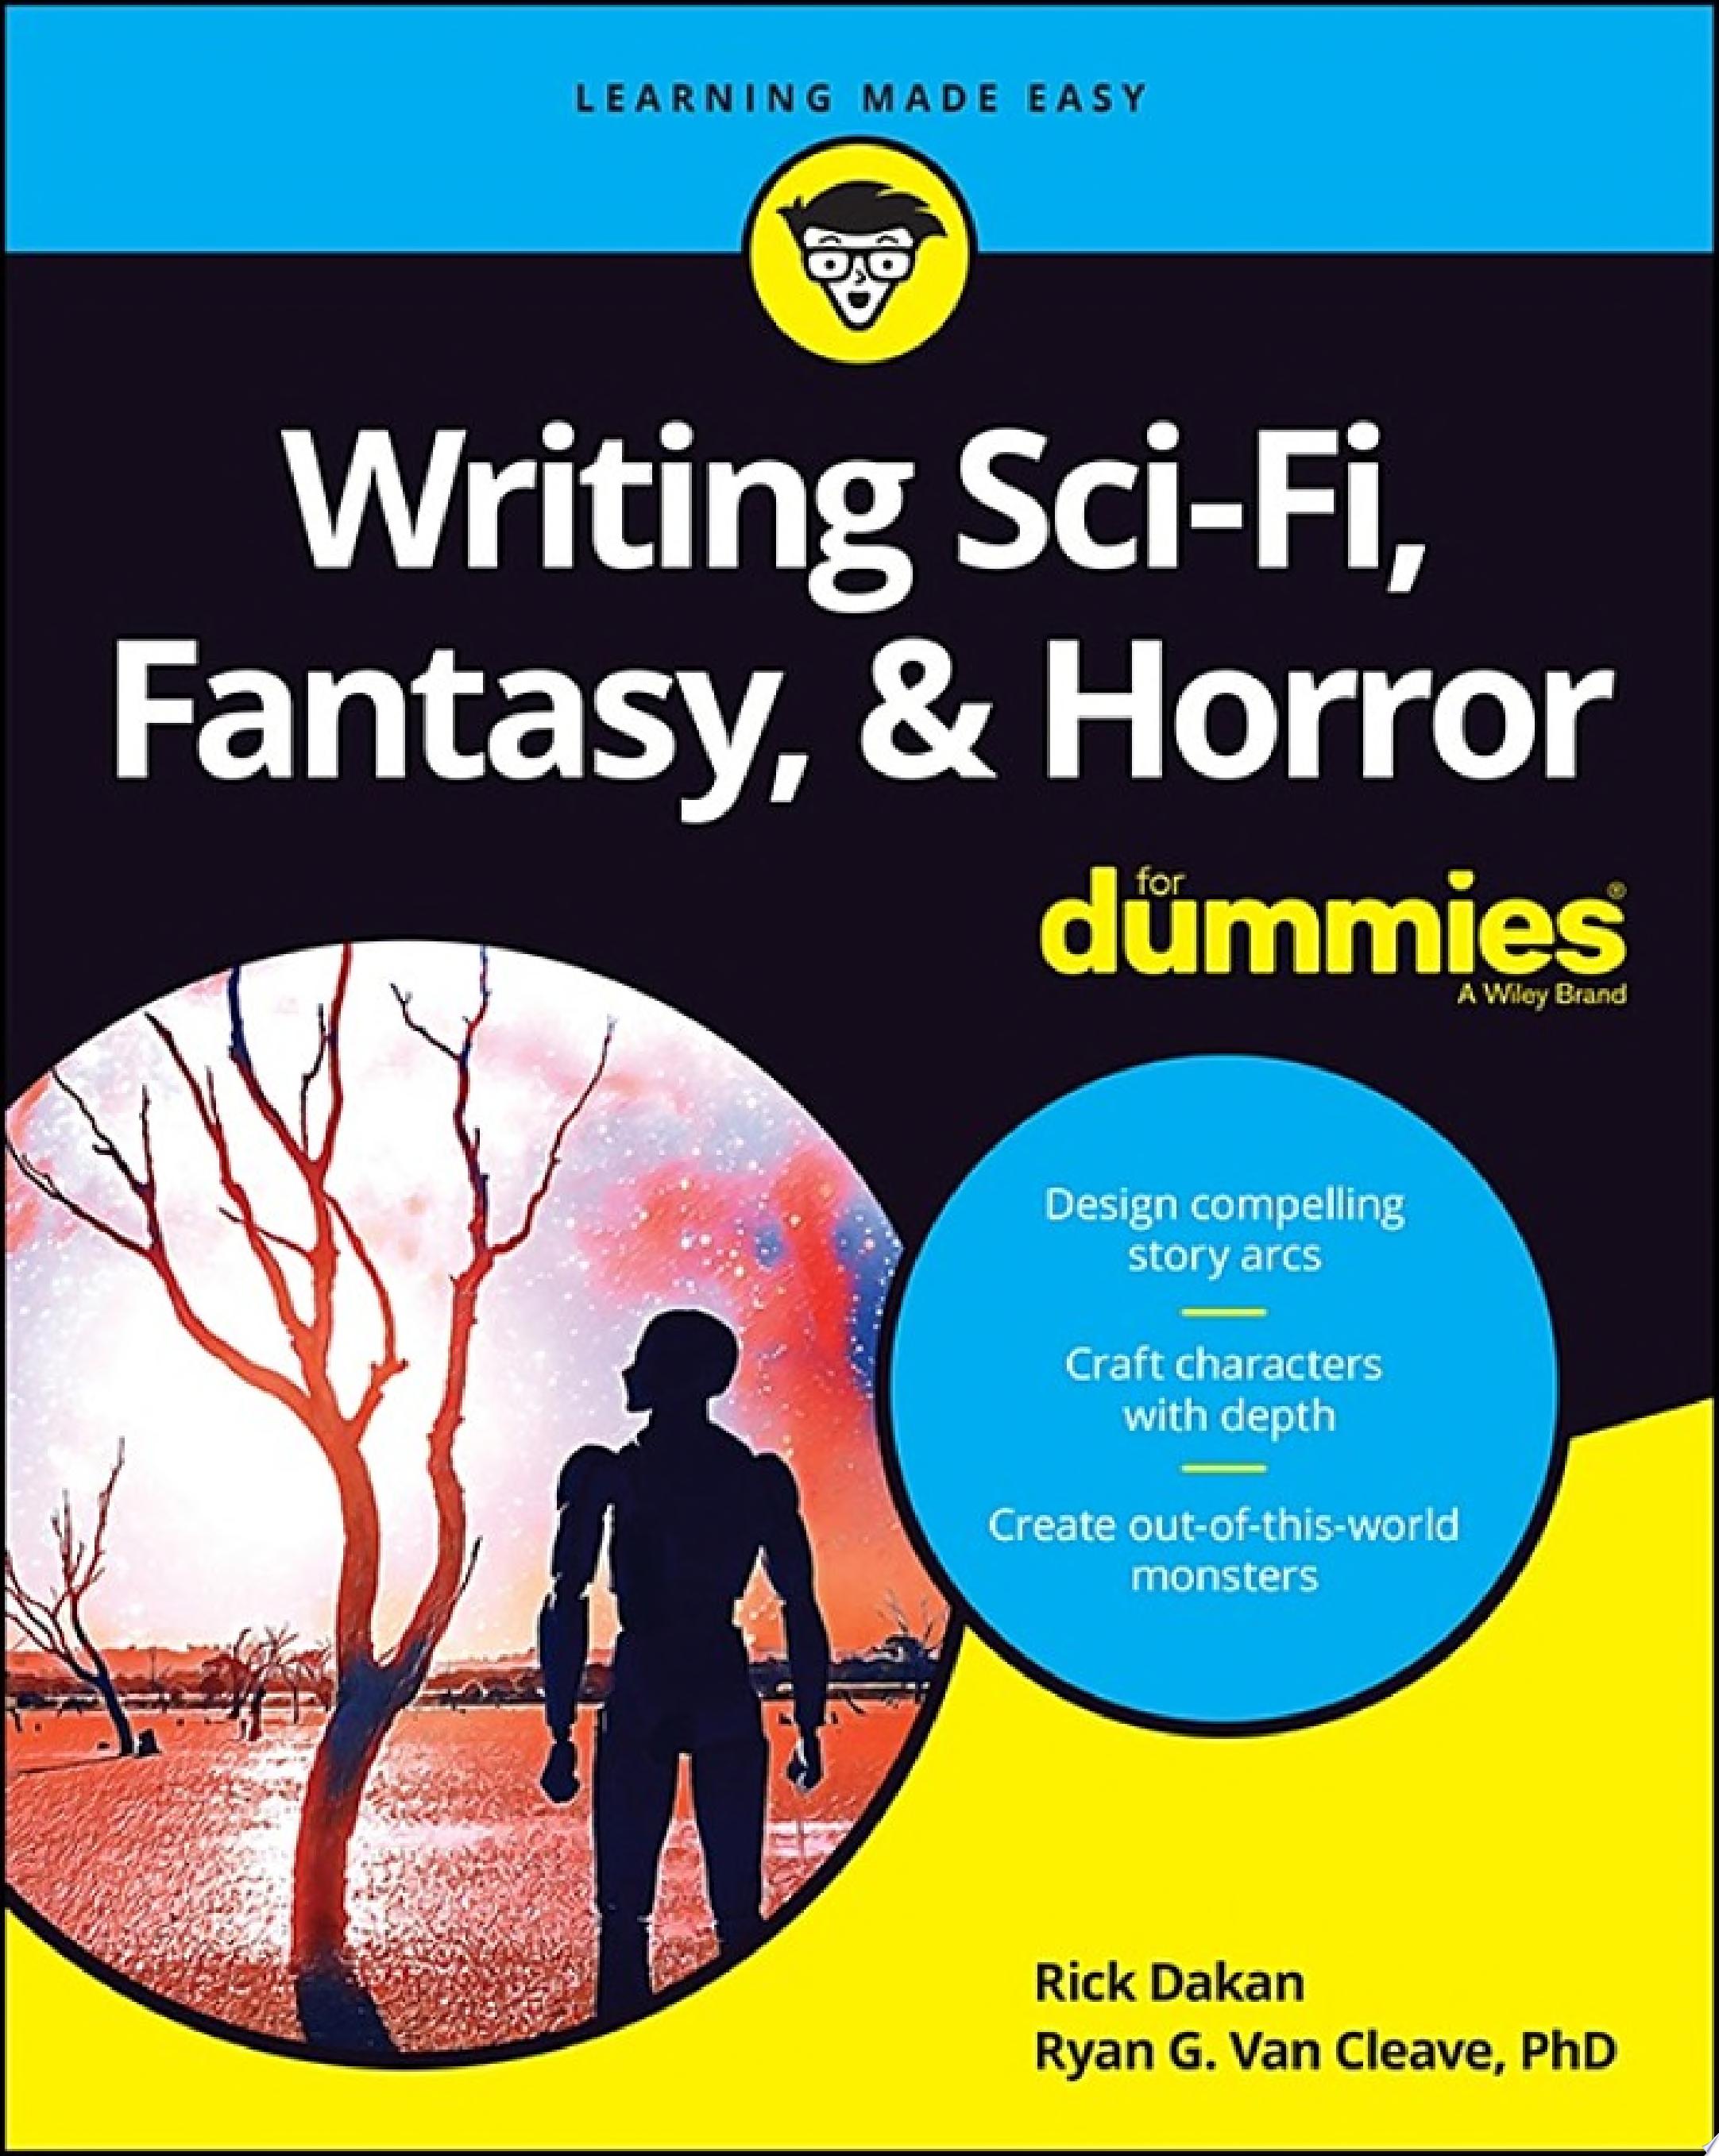 Image for "Writing Sci-Fi, Fantasy, & Horror For Dummies"